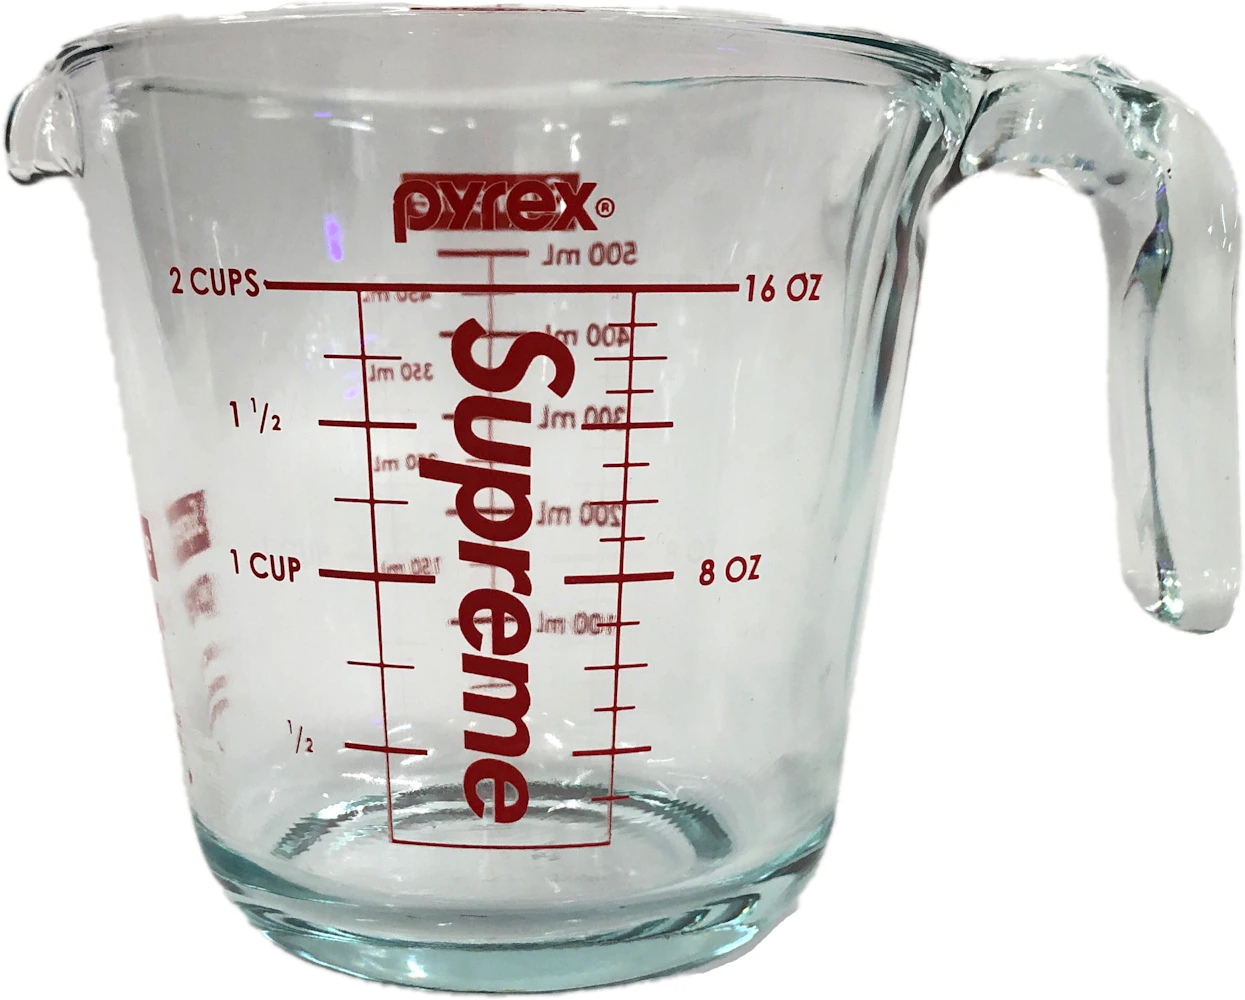 https://images.stockx.com/images/supreme-pyrex-2-cup-measuring-cup-clear-2.png?fit=fill&bg=FFFFFF&w=700&h=500&fm=webp&auto=compress&q=90&dpr=2&trim=color&updated_at=1606320617?height=78&width=78